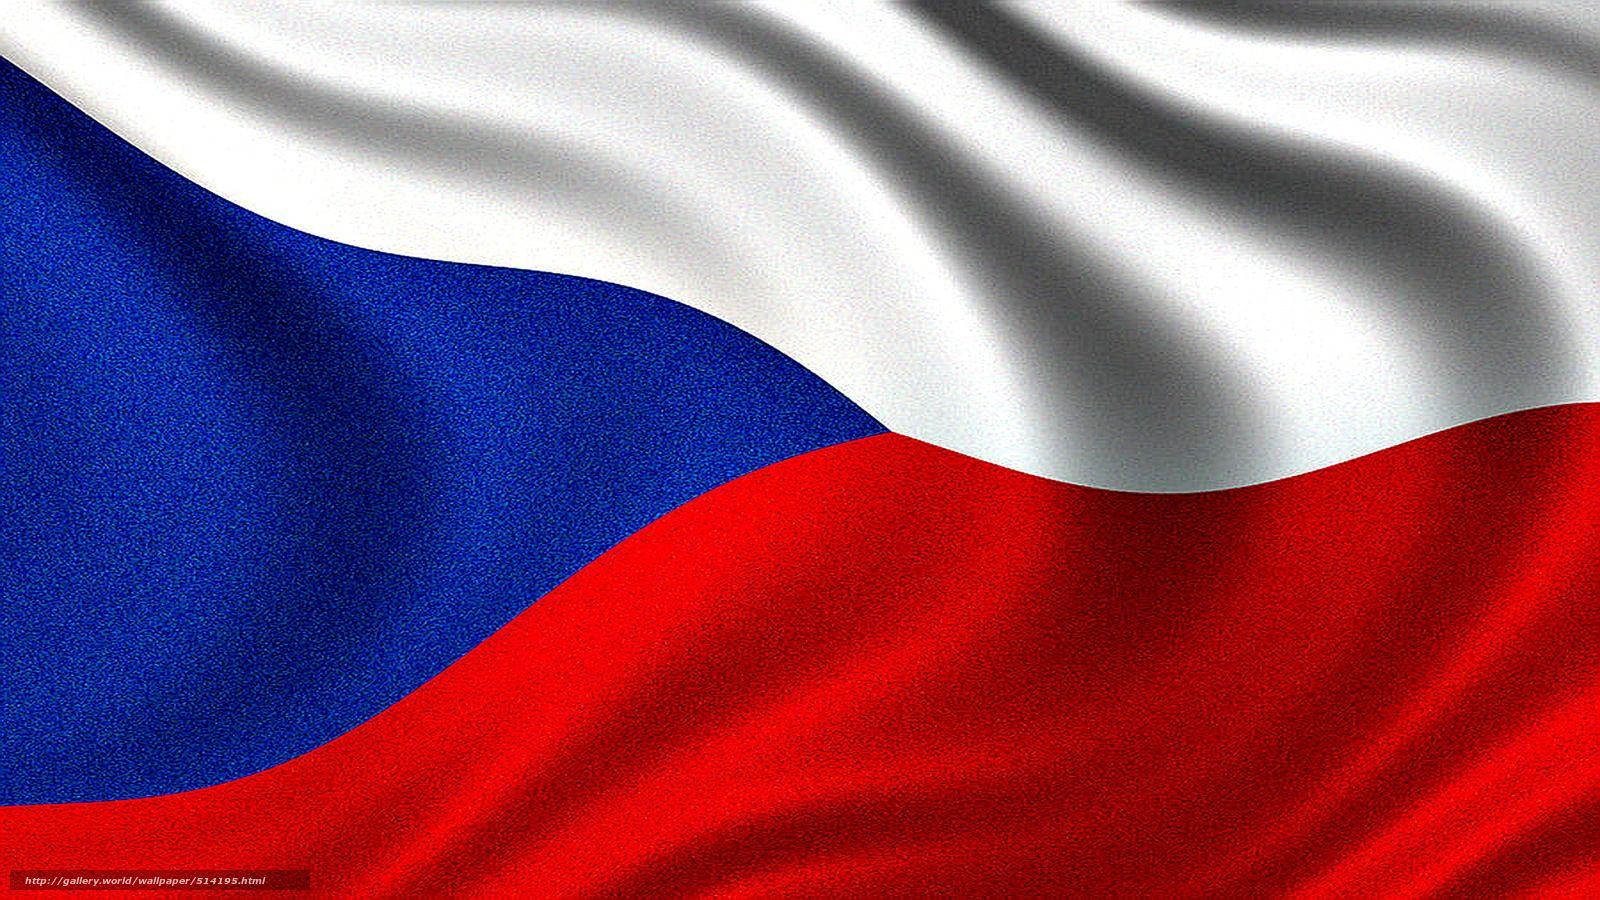 Download wallpaper Flag of the Czech Republic, Czech, Czech Republic flag of czech republic free desktop wallpaper in the resolution 1920x1080